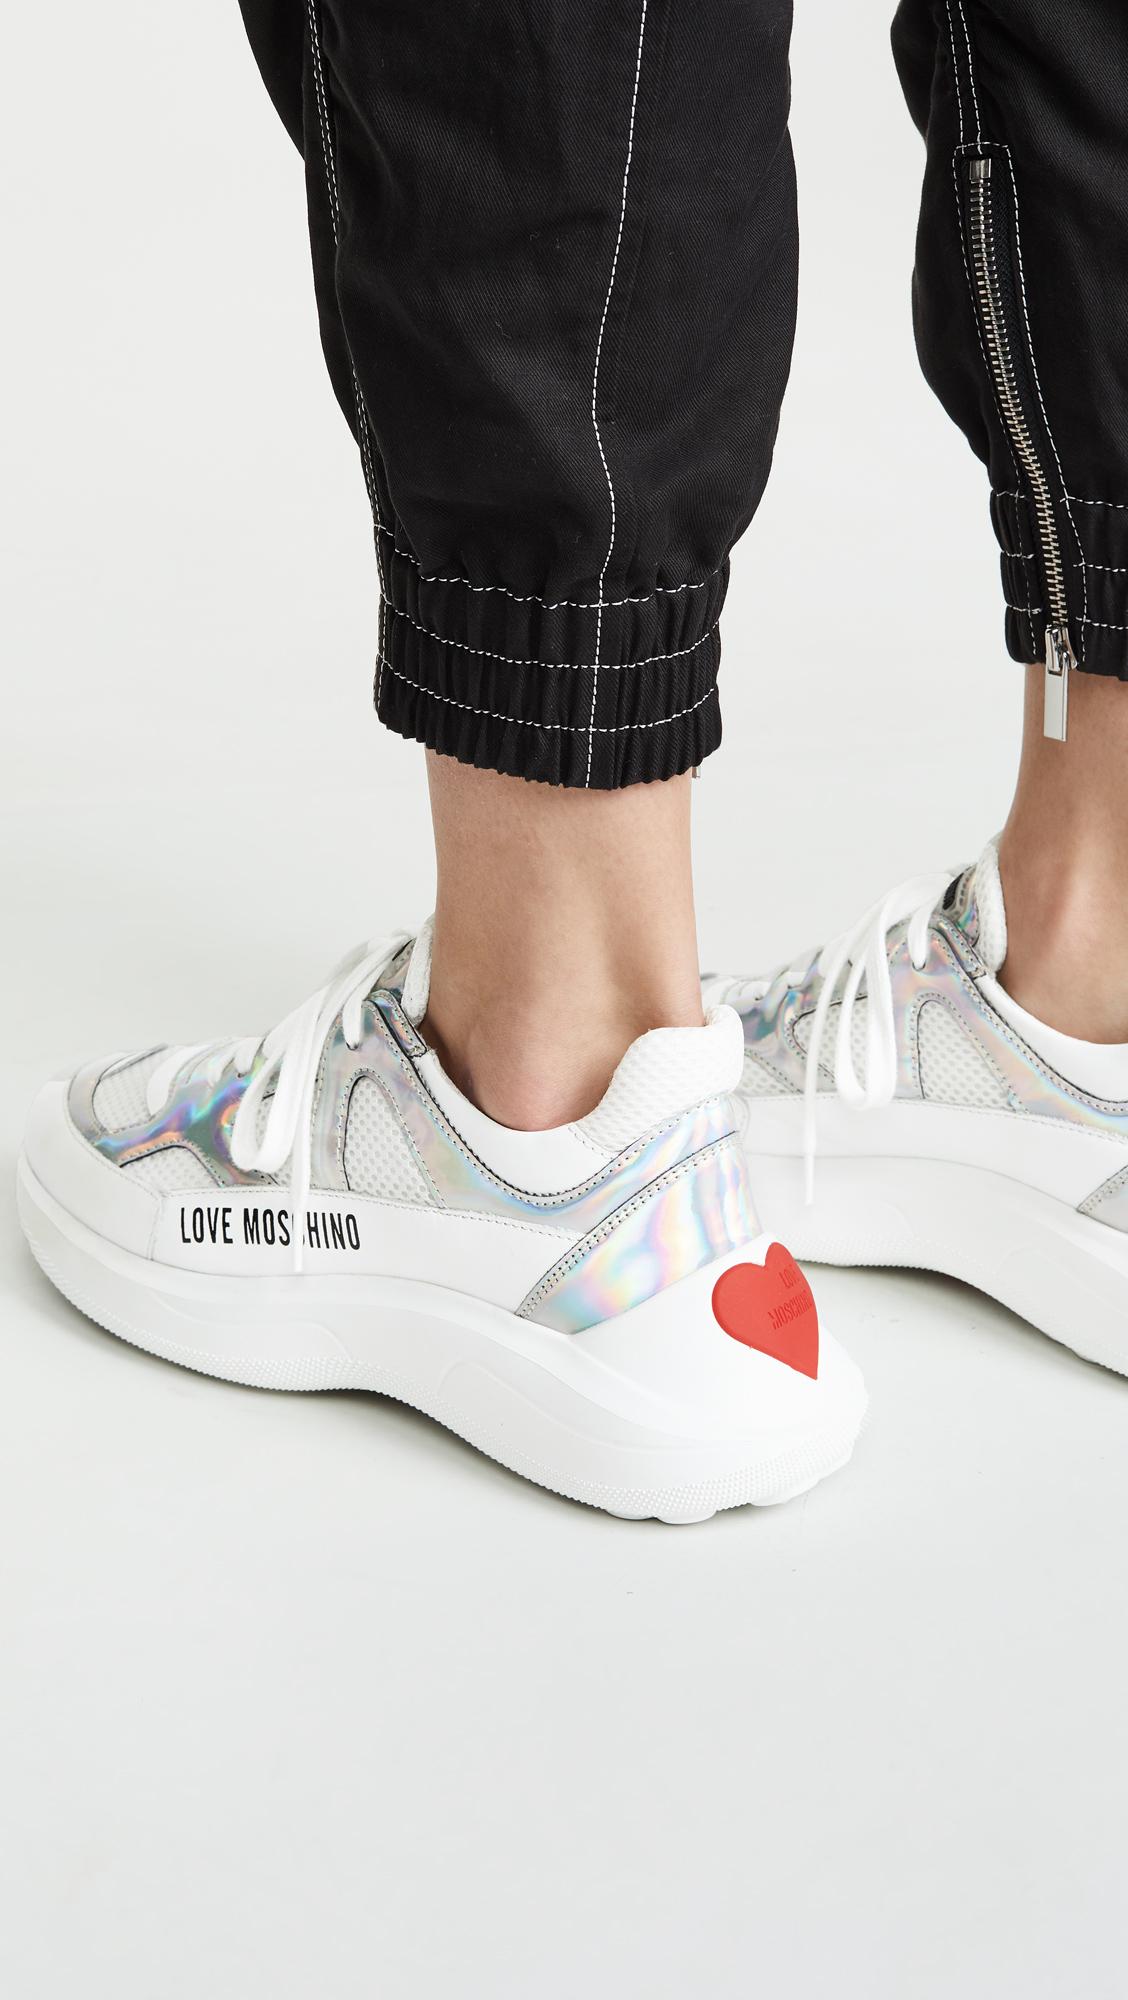 Moschino Super Heart Trainer Sneakers 